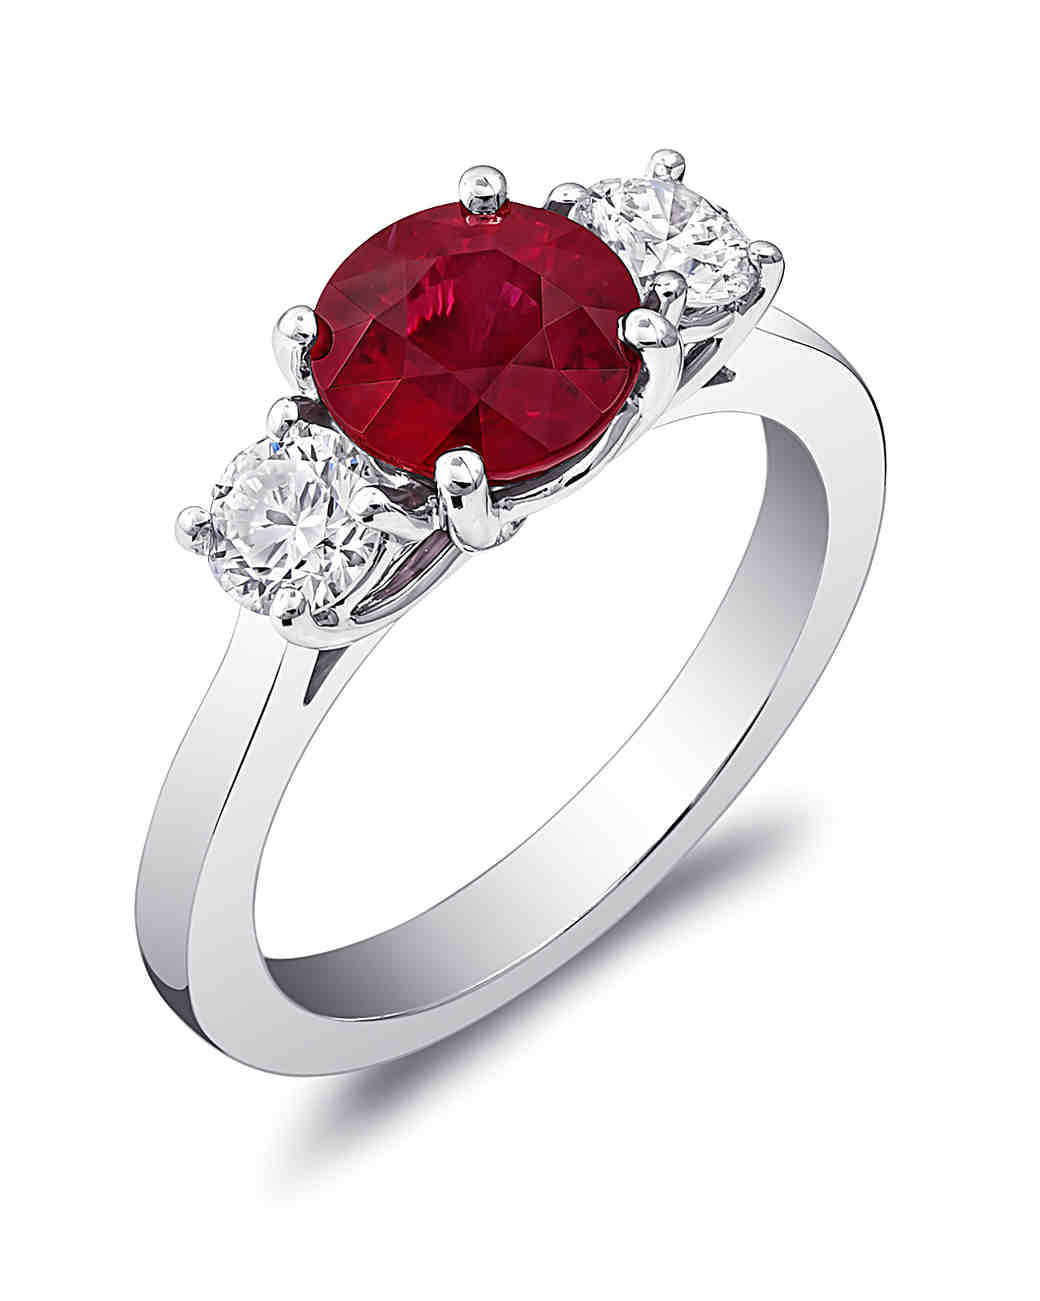 Ruby And Diamond Engagement Rings
 34 Royal Ruby Engagement Rings